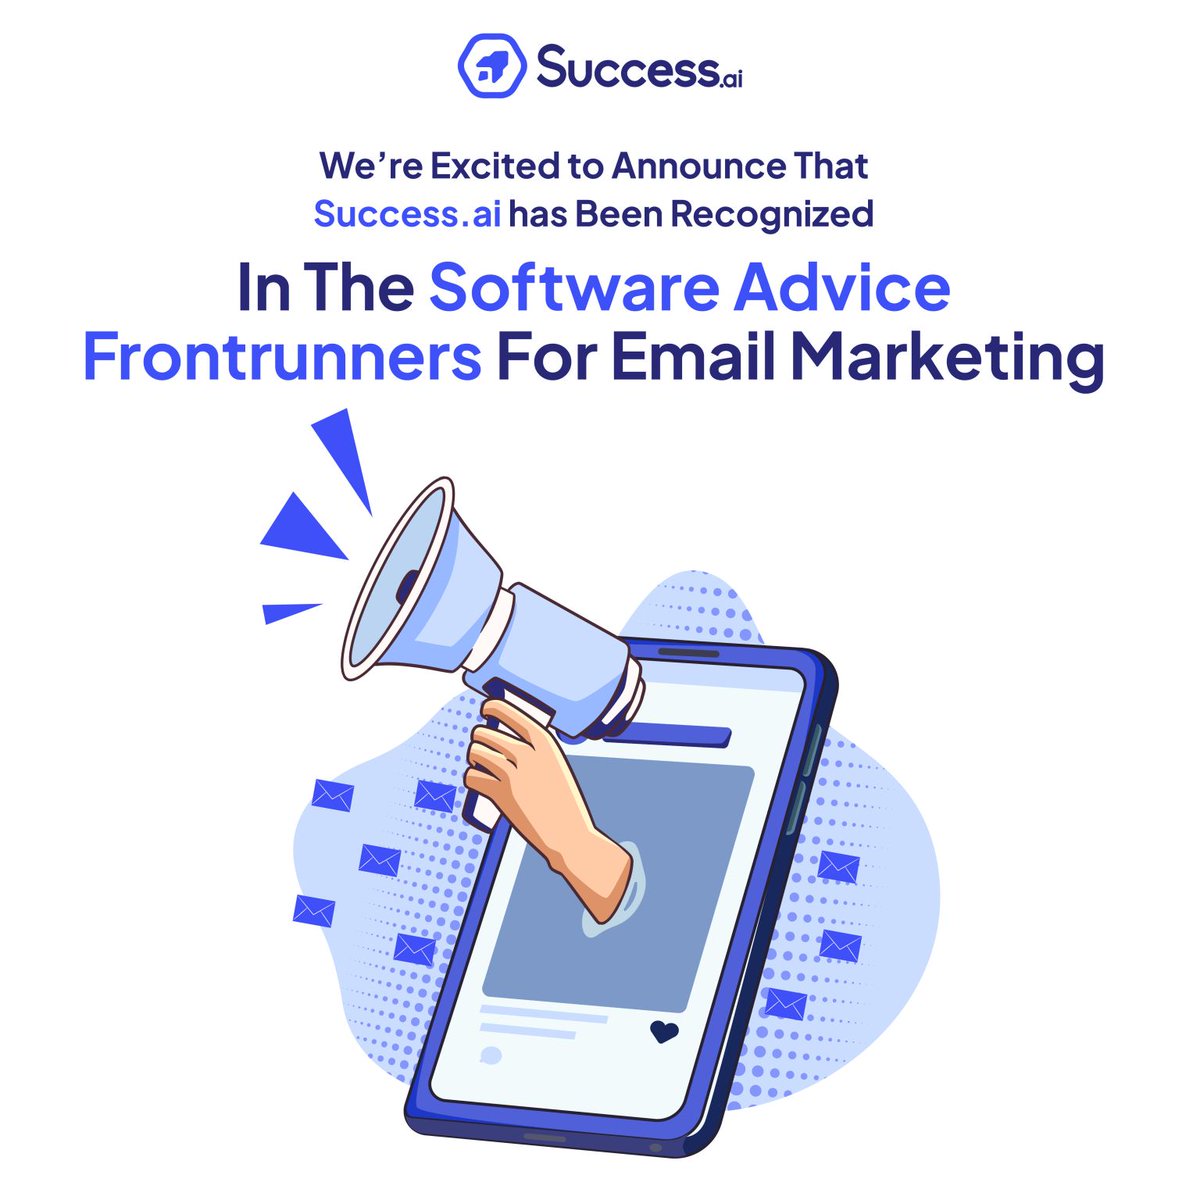 Success.ai: Leading in Email Marketing Excellence, Recognized by Software Advice. Craft impactful cold emails for B2B success: softwareadvice.com/email-marketin… 

 #EmailMarketing #B2B #Success